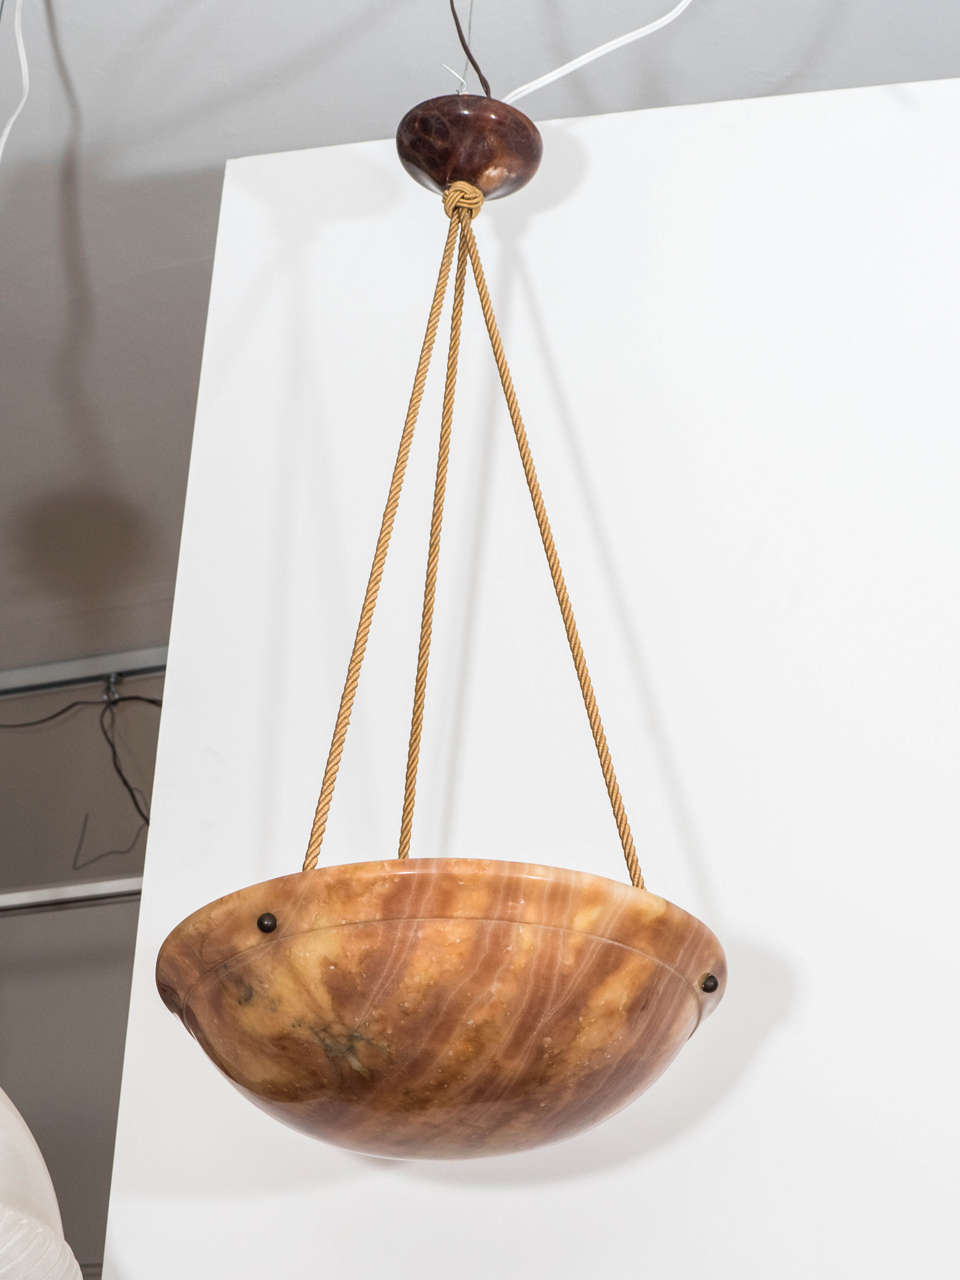 The natural tortoise-toned alabaster bowl displays fossilized reeds throughout, a carved band and an out-turned, graceful rim. Recently rewired, the fixture hold three 60 watt bulbs or three higher wattage LED bulbs.